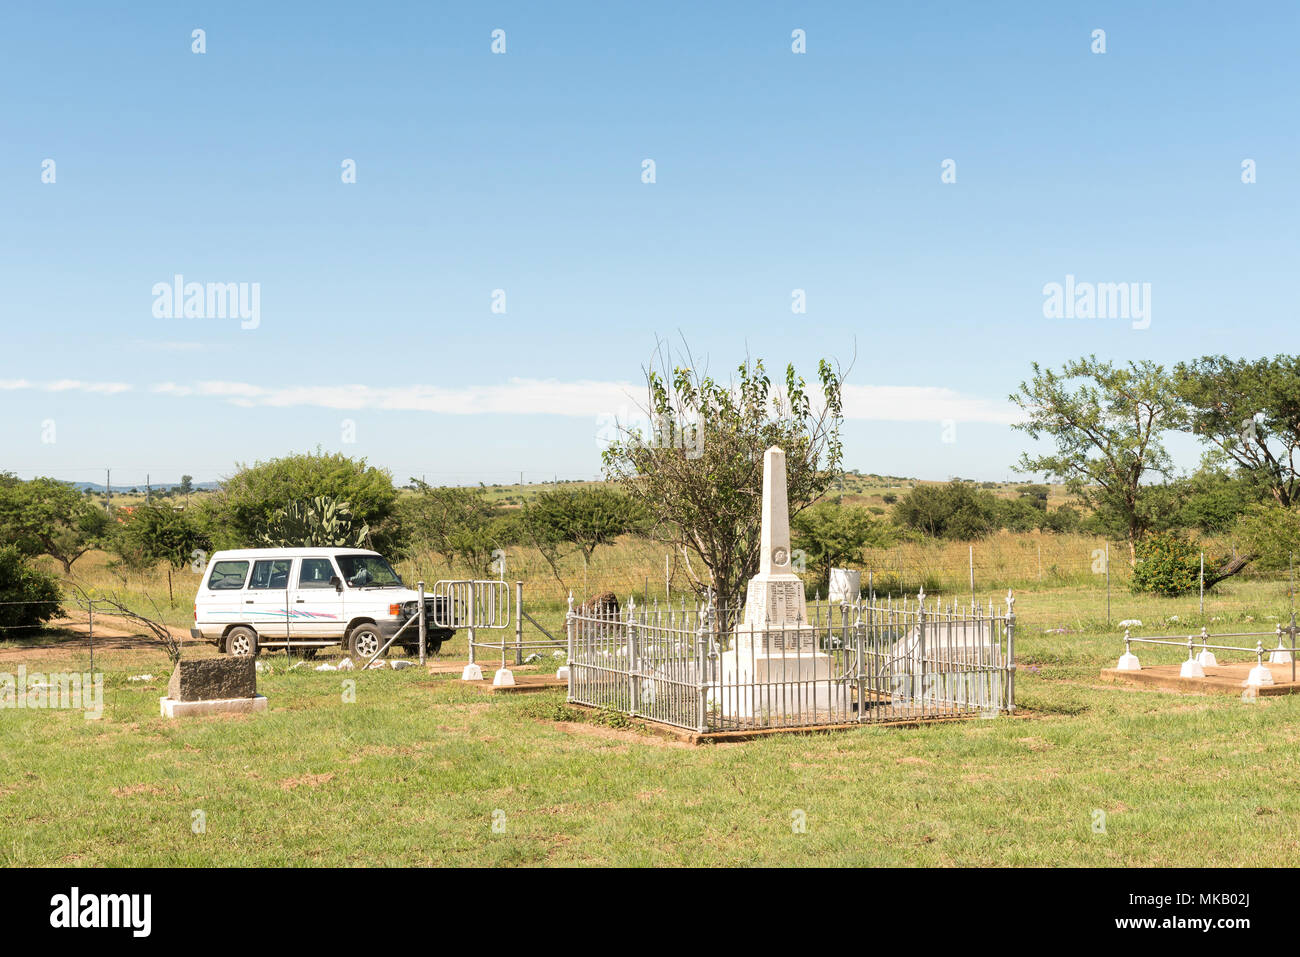 COLENSO, SOUTH AFRICA - MARCH 21, 2018: A vehicle and a monument at the entrance to the Clouston Garden of Rememberance for British soldiers killed in Stock Photo